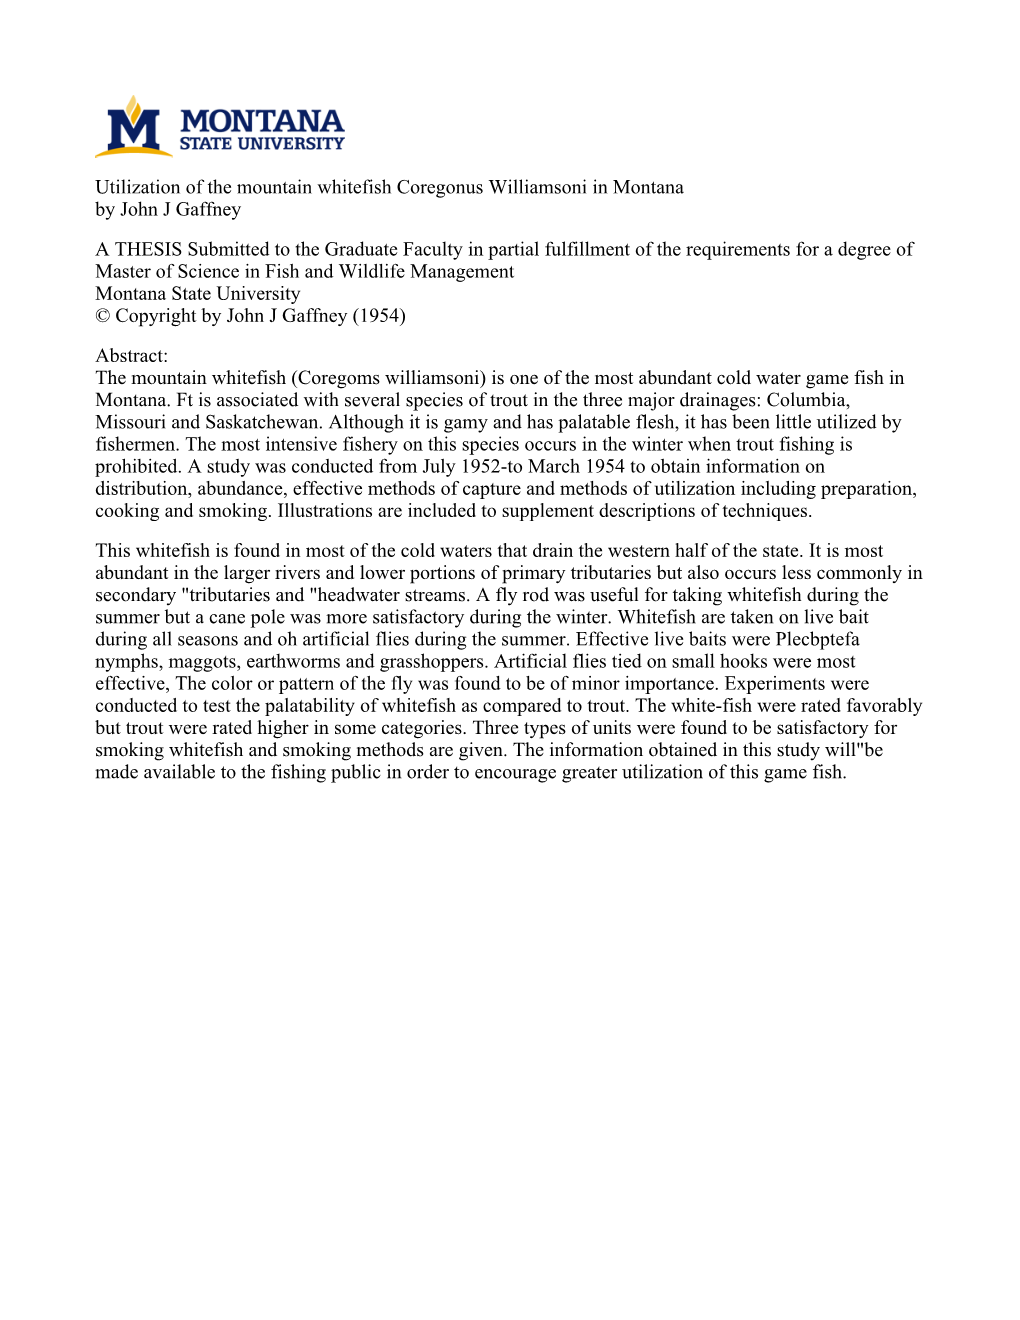 Utilization of the Mountain Whitefish Coregonus Williamsoni in Montana by John J Gaffney a THESIS Submitted to the Graduate Facu